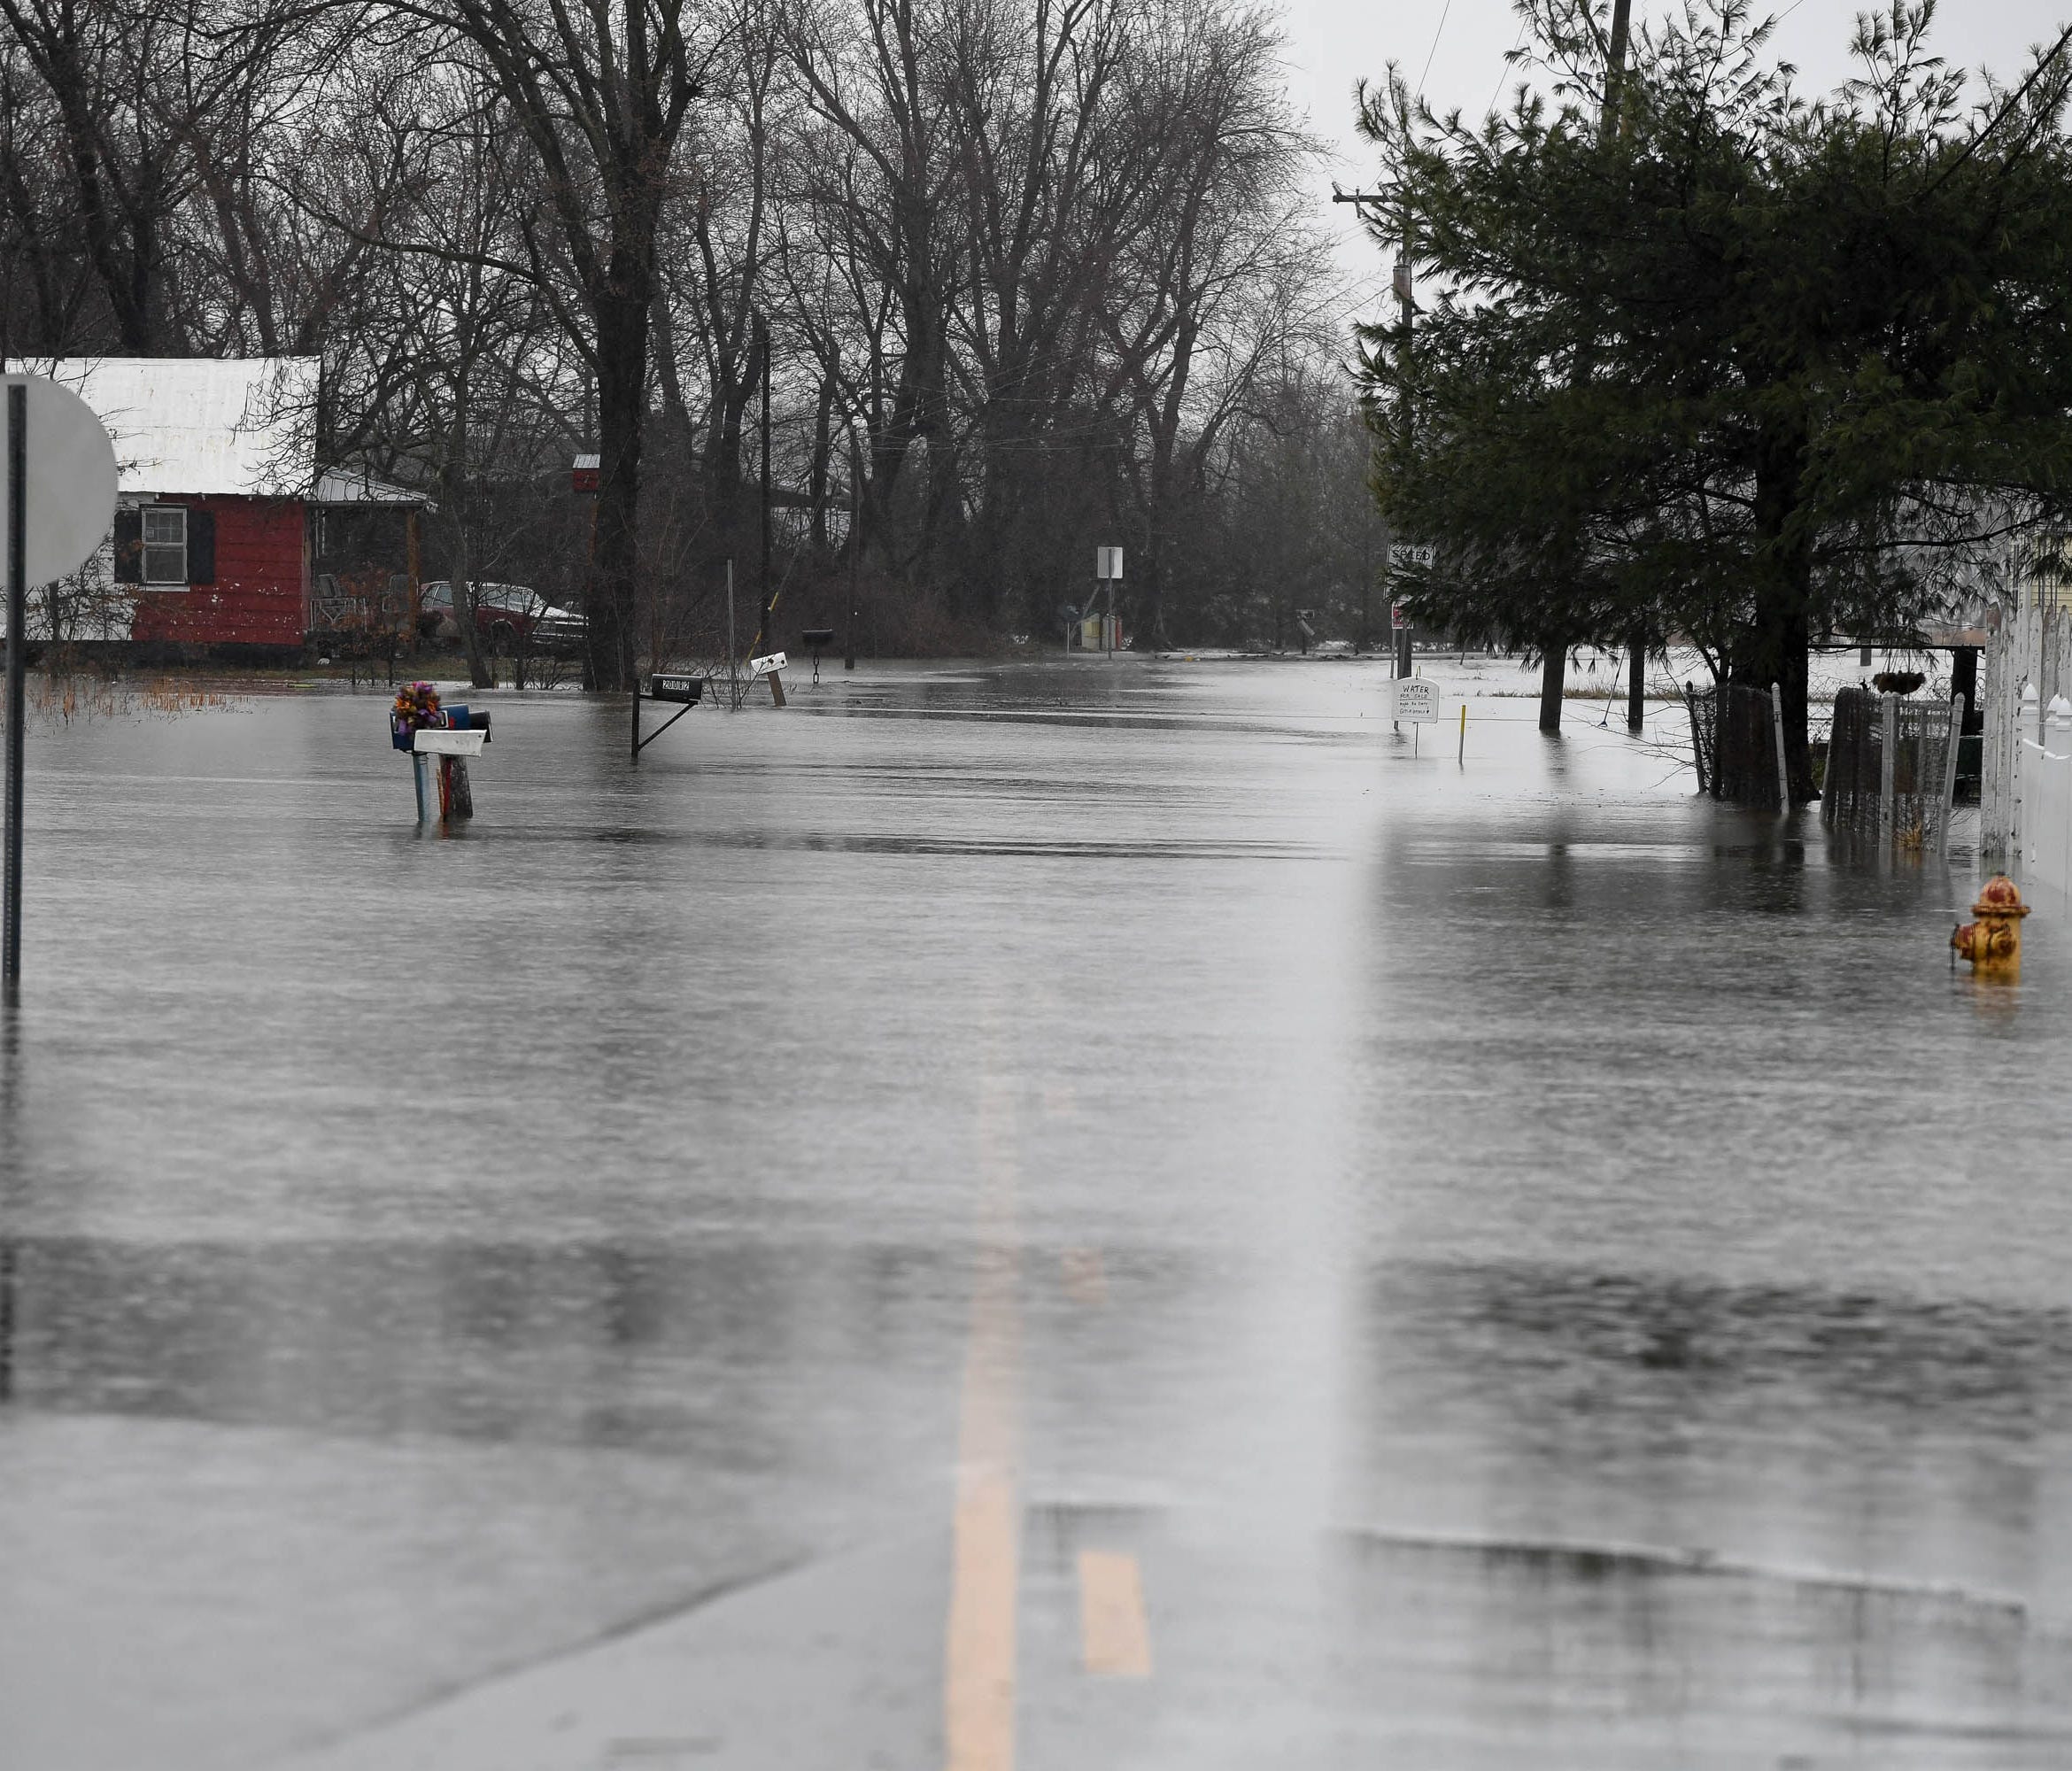 Highway 811 in Beals, Ky. was dry on Friday is under water on Saturday as river waters continue to rise in the Tri-State area Saturday. Flooding is expected to get worse as afternoon storms are expected to bring wind, some flash flooding and a chance